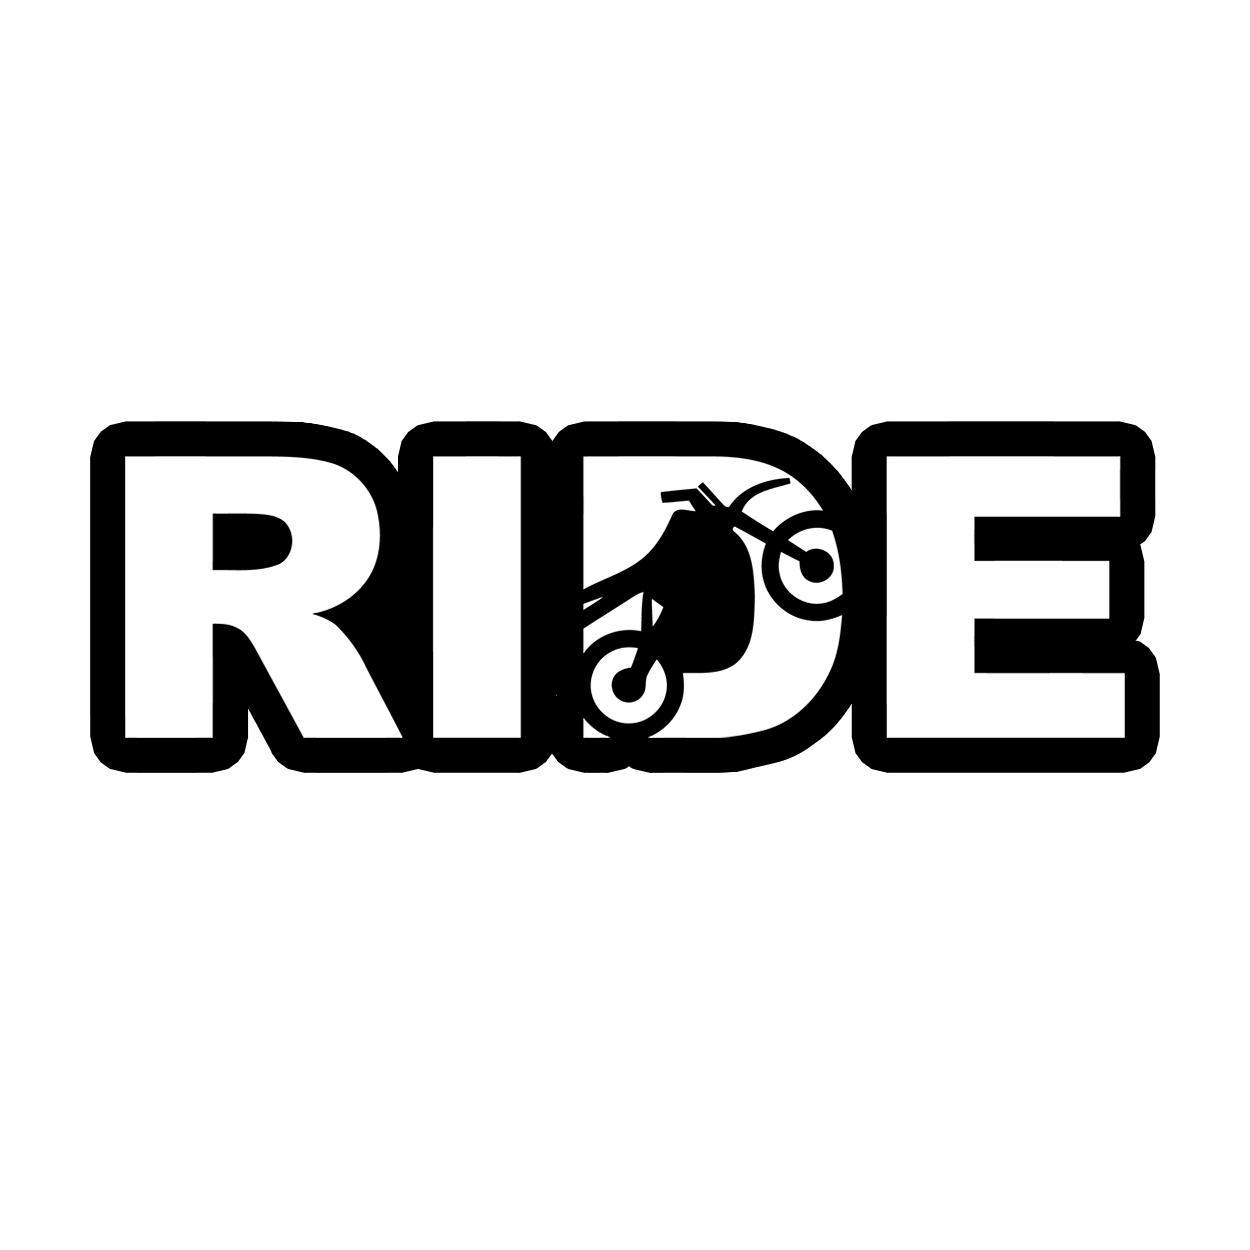 Ride Brand Logo Classic Sticker FREE Promotional Giveaway from RideBrand.com